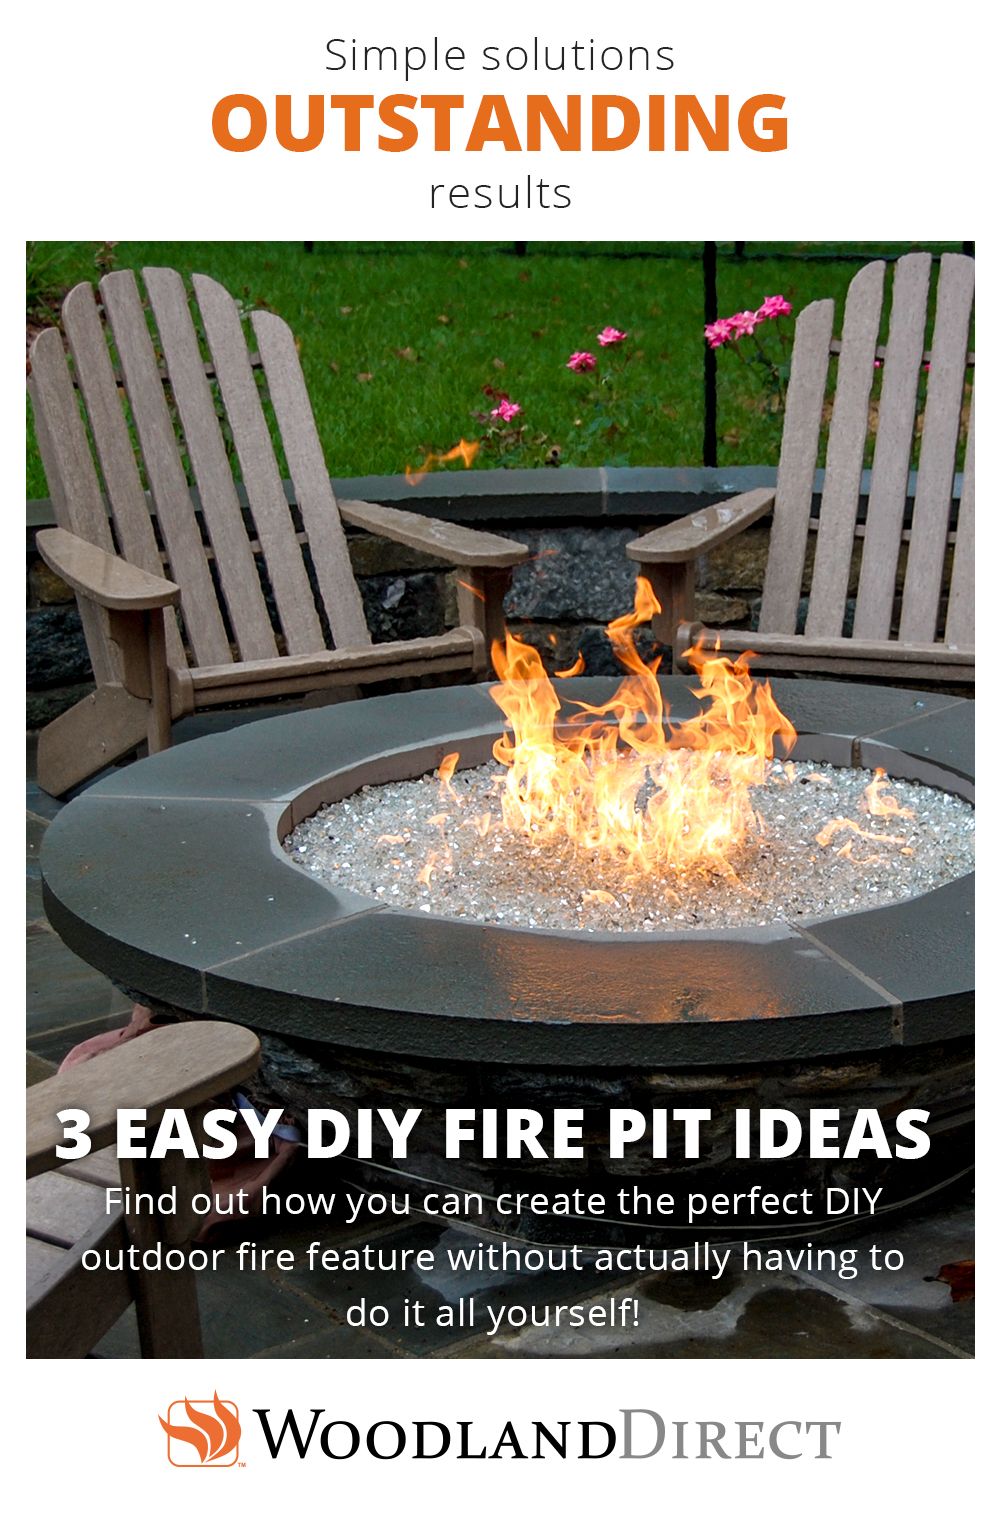 Woodland Direct Fireplace Elegant 80 Best Diy Gas Fire Pit Materials Images In 2019